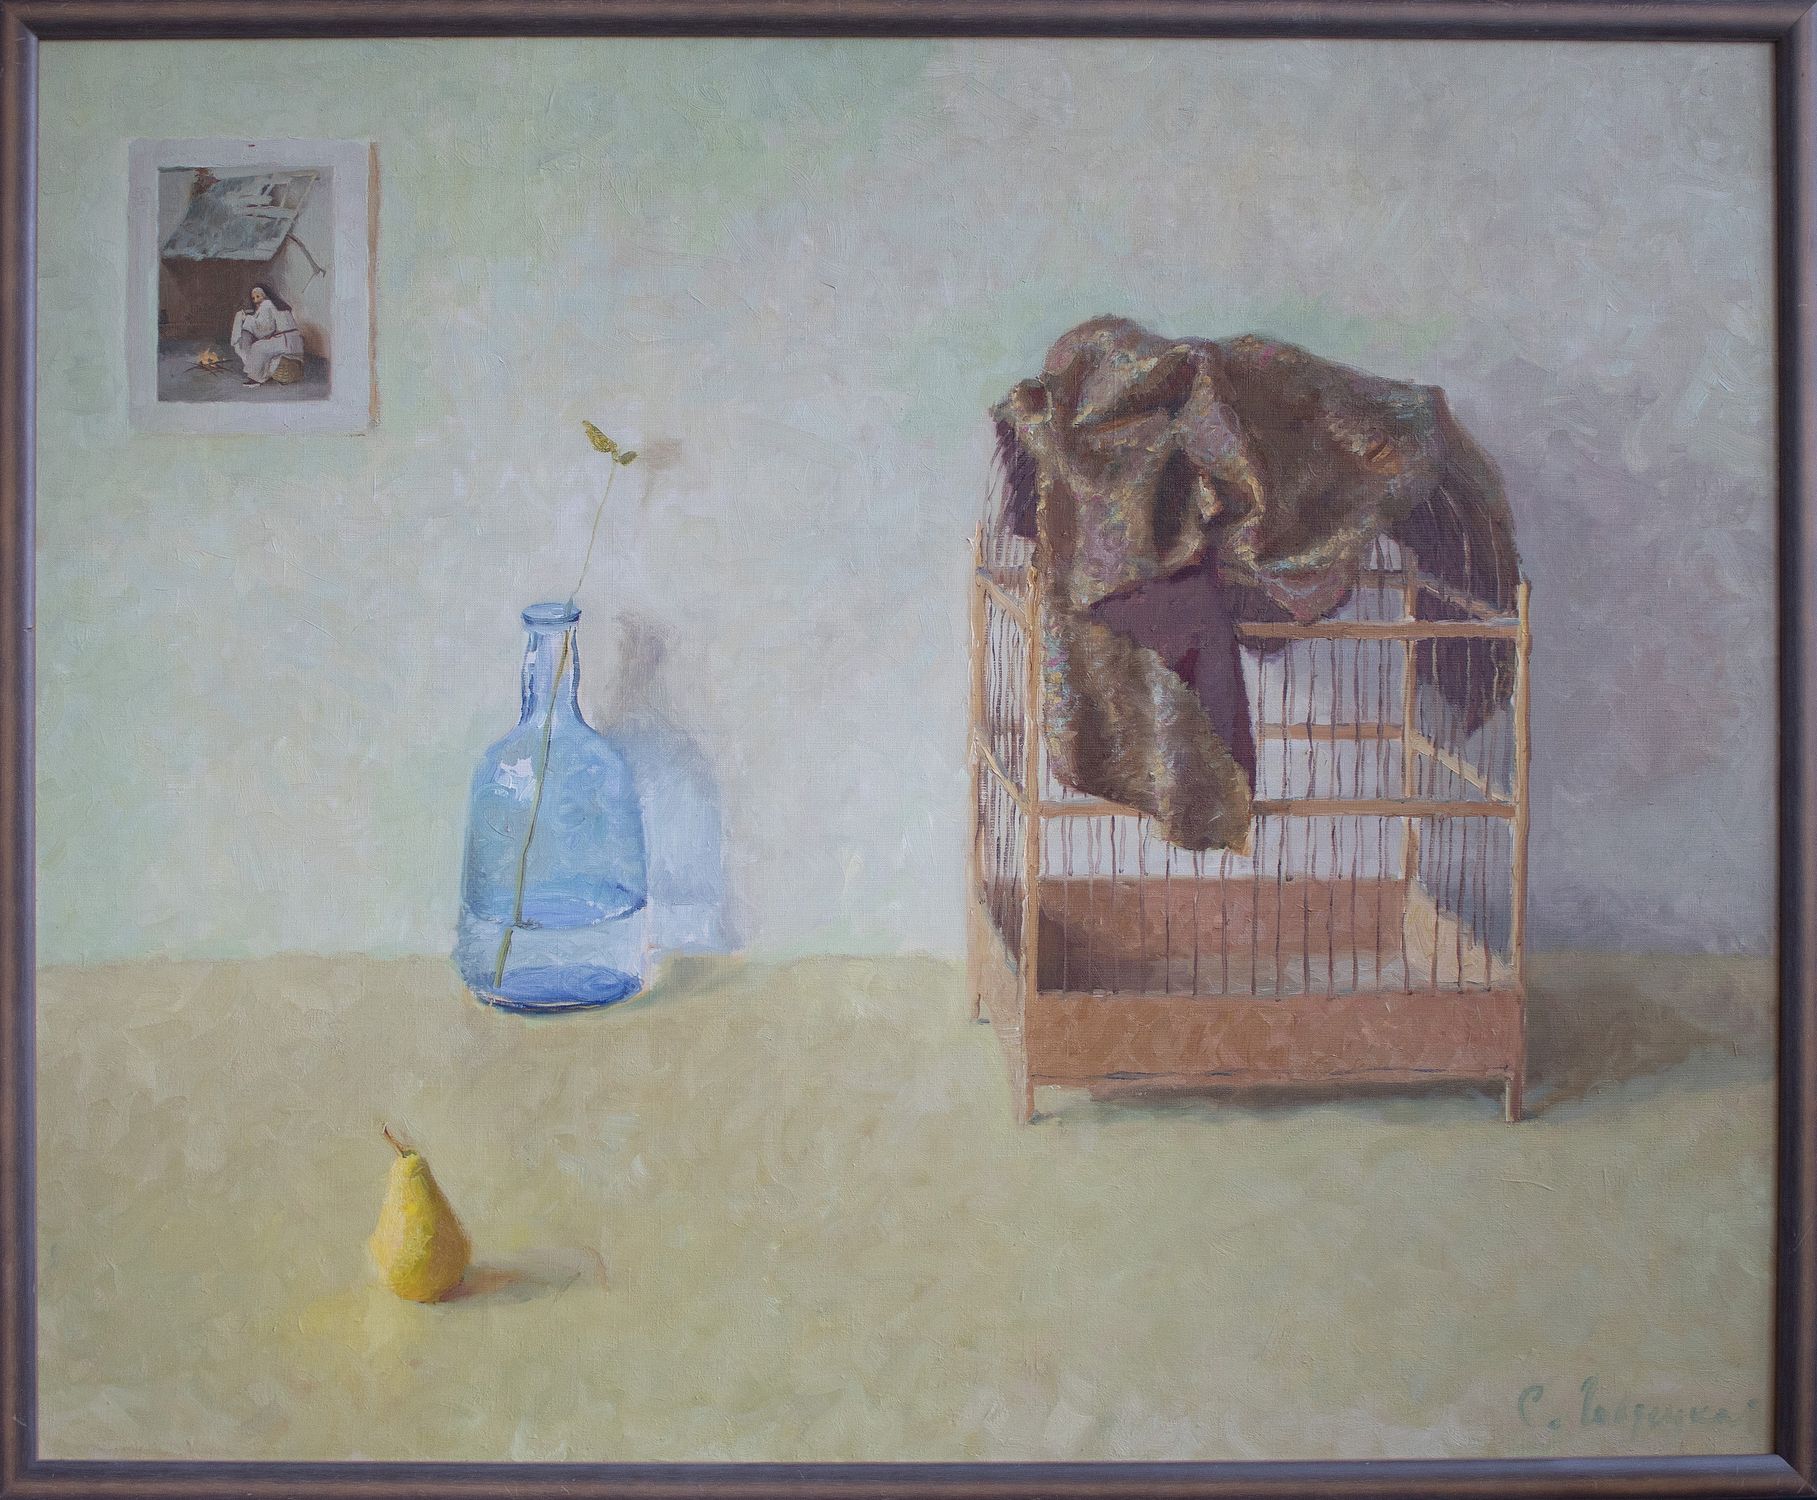 "Still life with the cage"